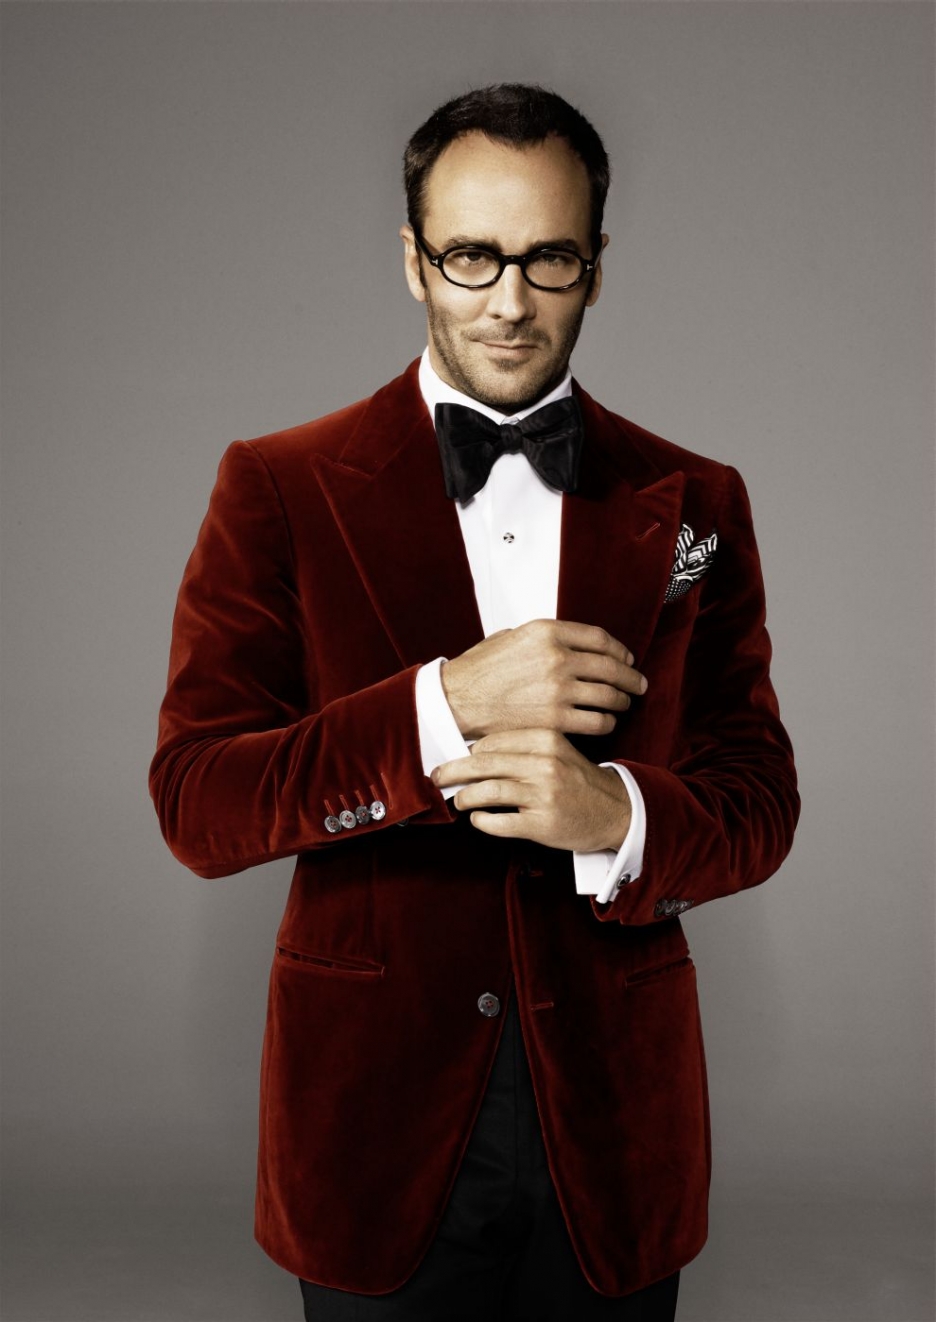 Tom Ford - Sophisticated style icon - 5 Star Wedding Suits